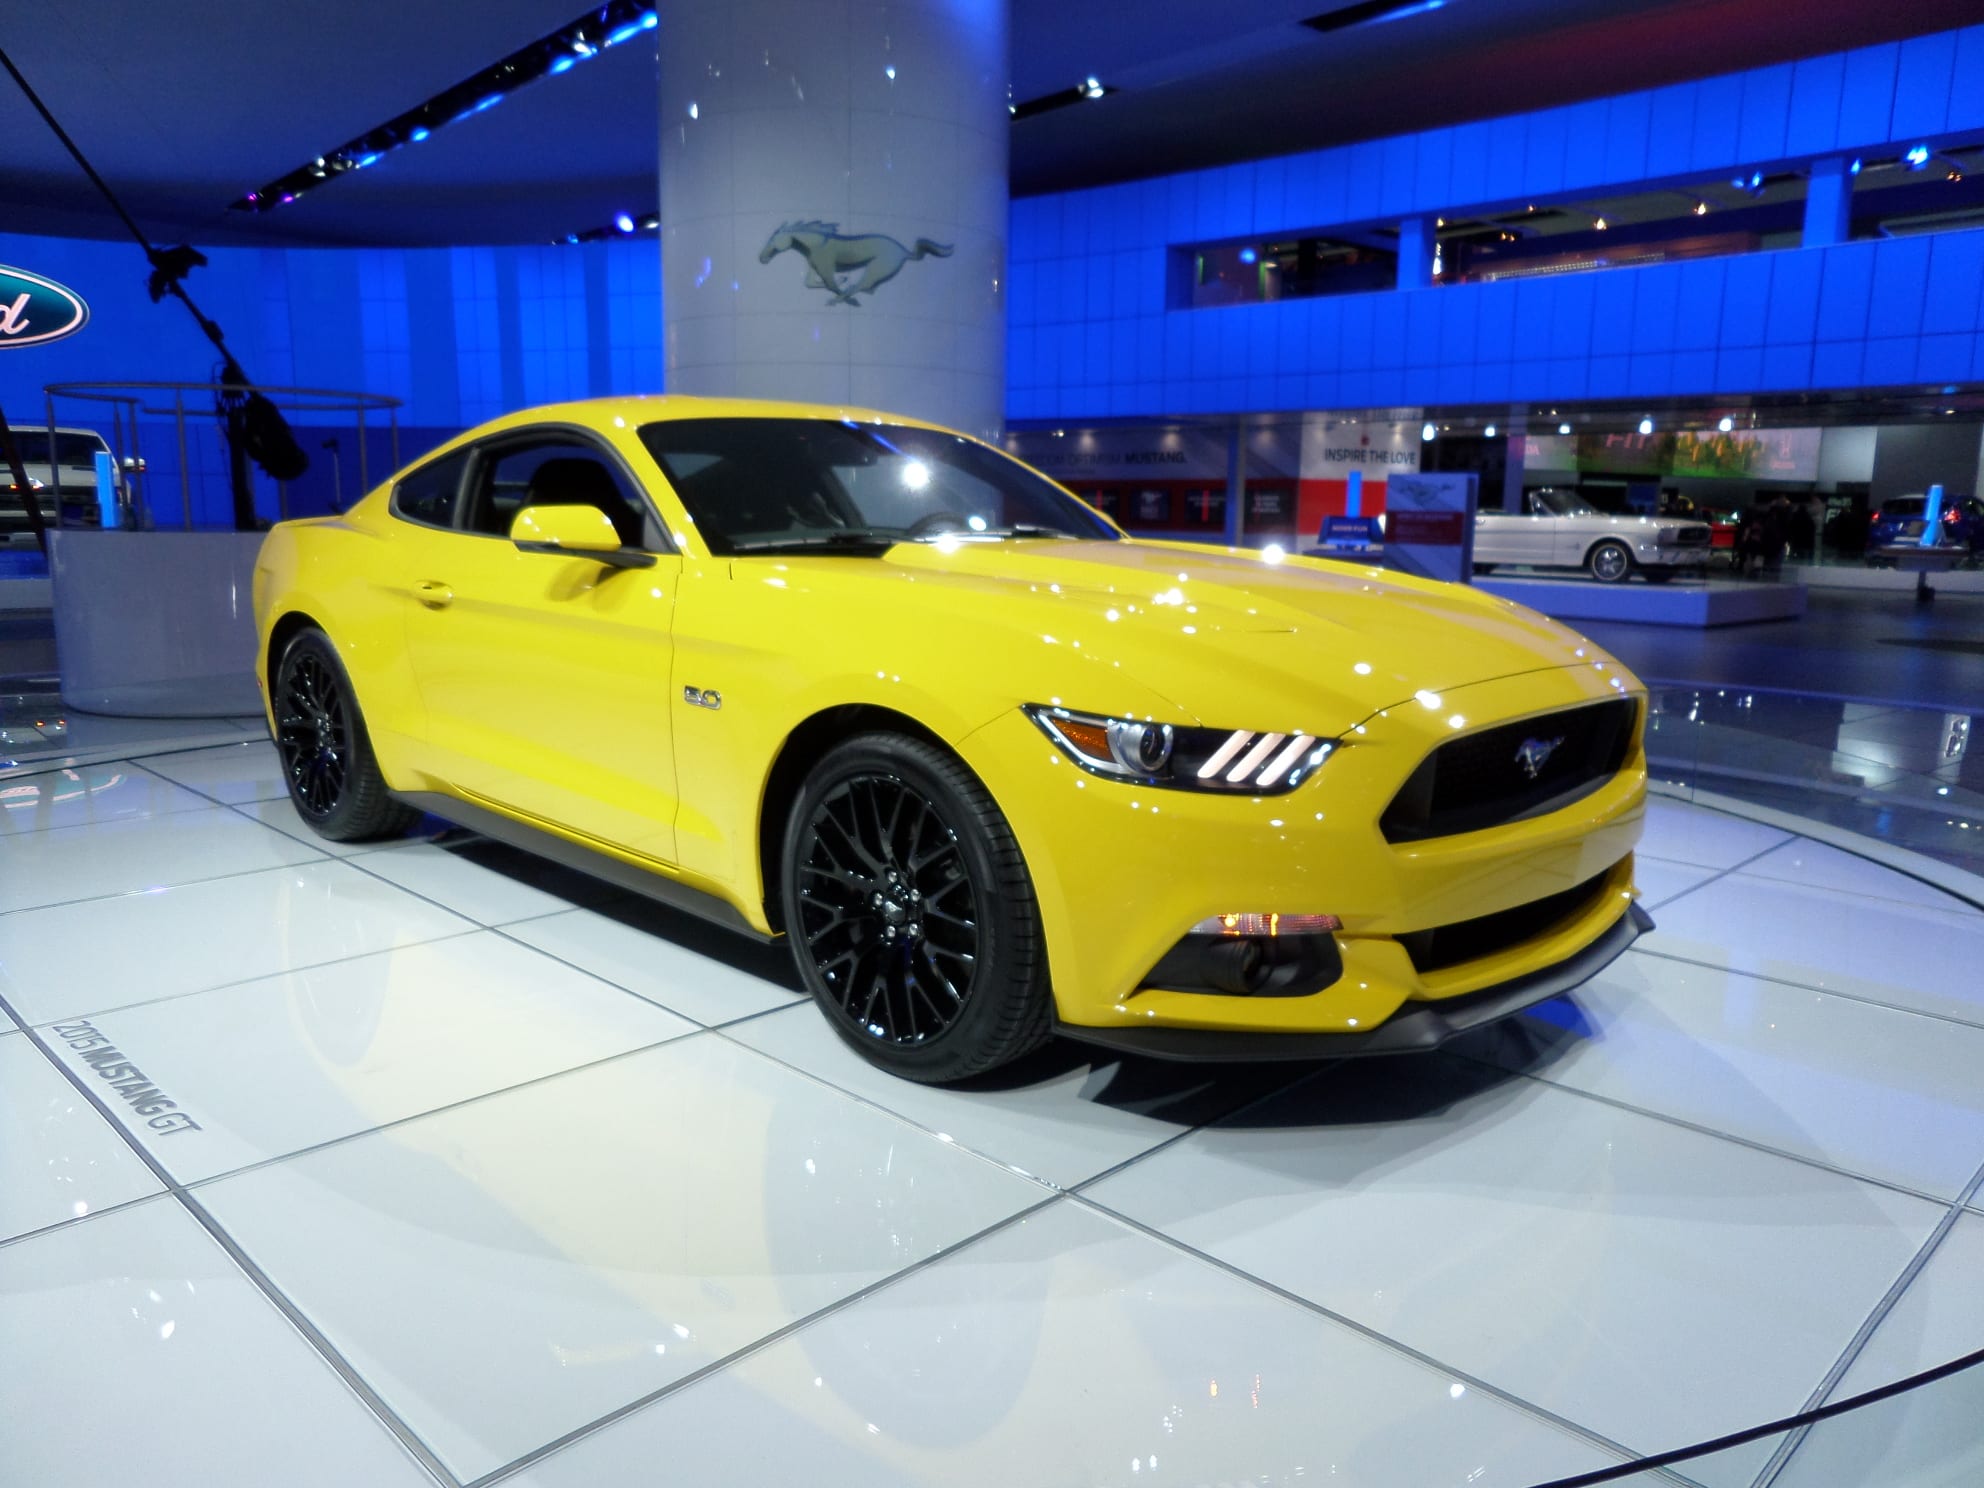 Yellow 2015 Ford Mustang. A mid-sized sports car